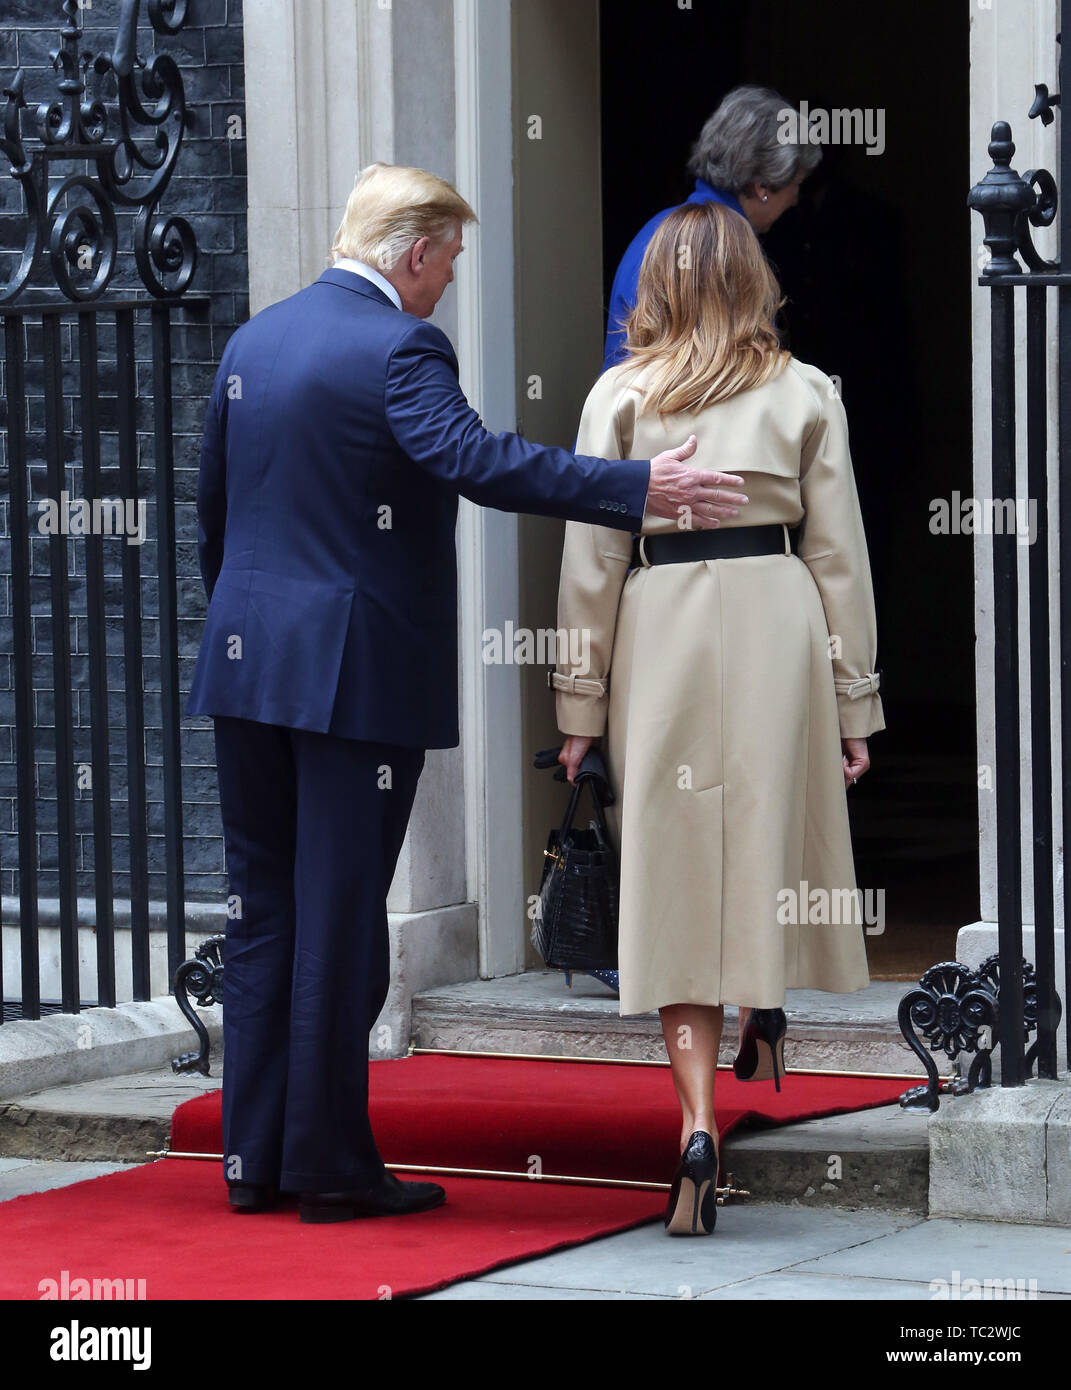 London, UK. 04th June, 2019. US President Donald Trump and his wife Melania Trump meet with UK Prime Minister Theresa May and her husband PhillipMay (not pictured) as they visit number 10 Downing Street as part of Donald Trump official state visit to the UK. Credit: SOPA Images Limited/Alamy Live News Stock Photo